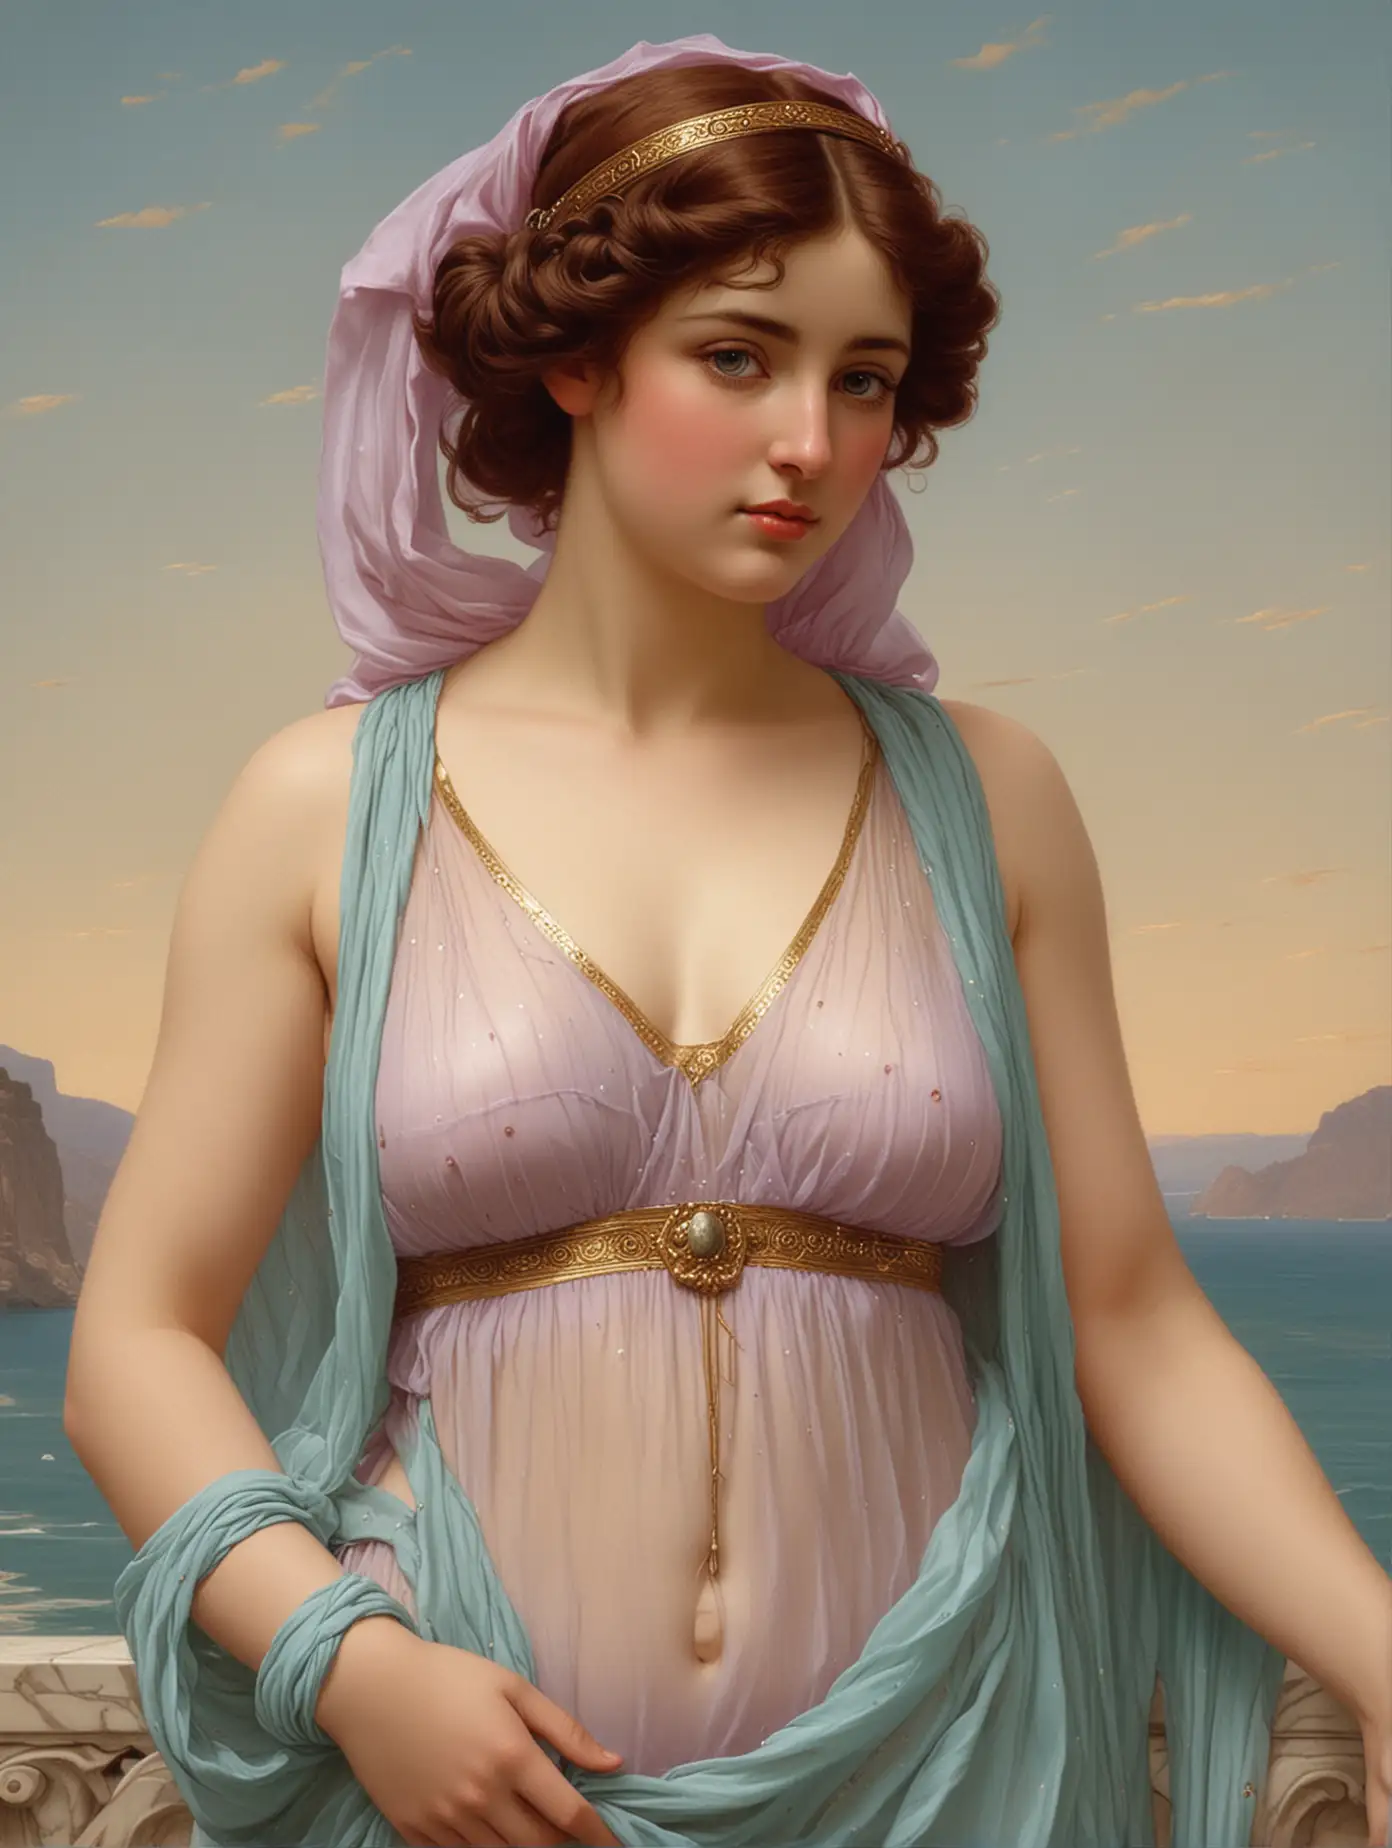 William-Godward-Painting-Stunning-Aphrodite-in-Delicate-Garb